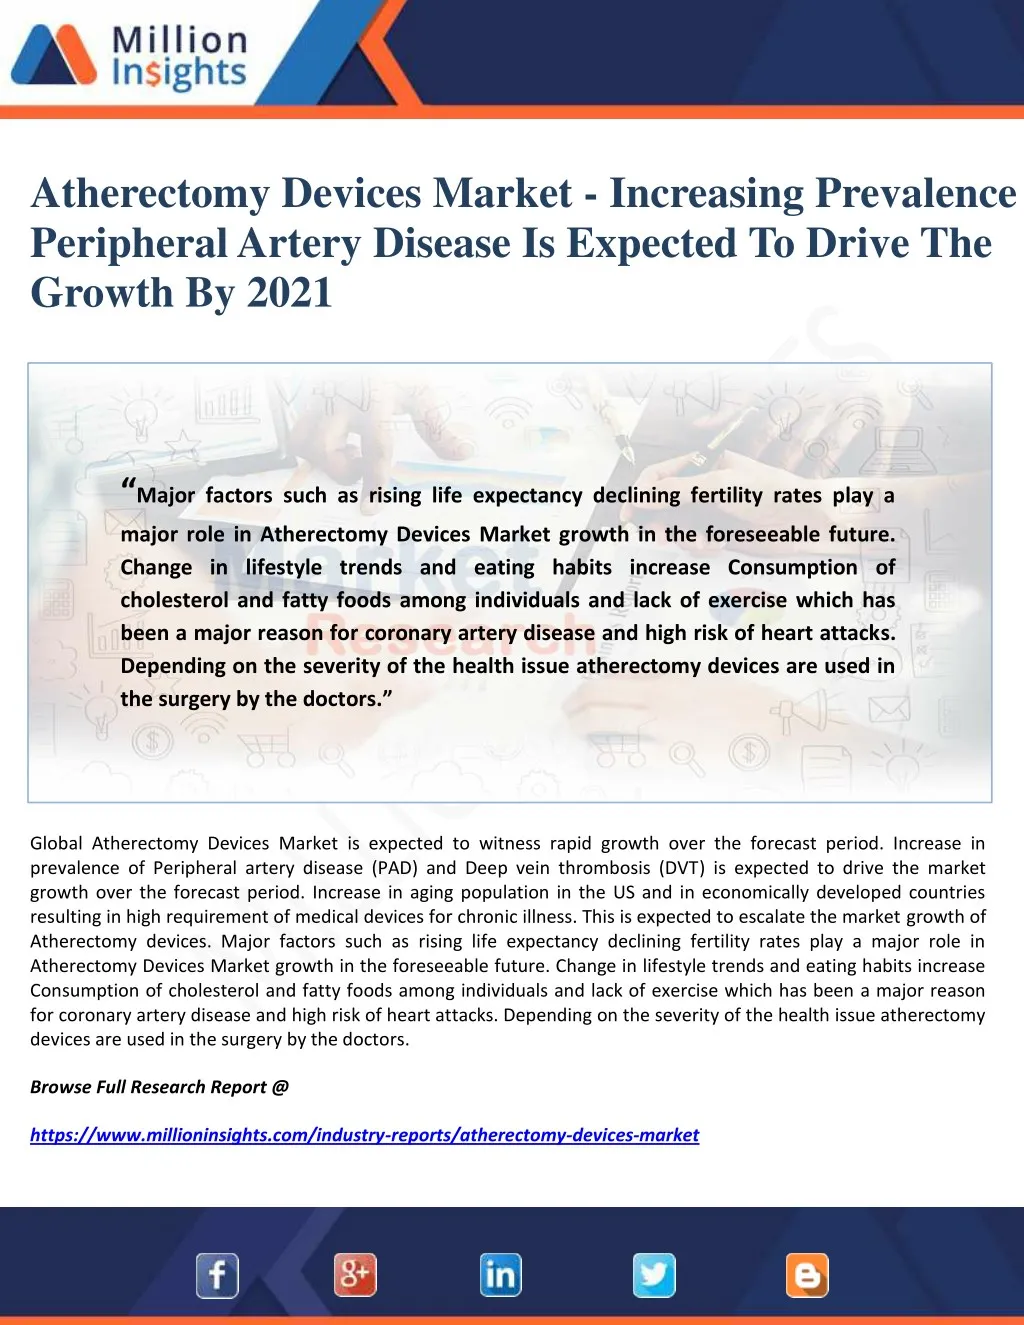 atherectomy devices market increasing prevalence